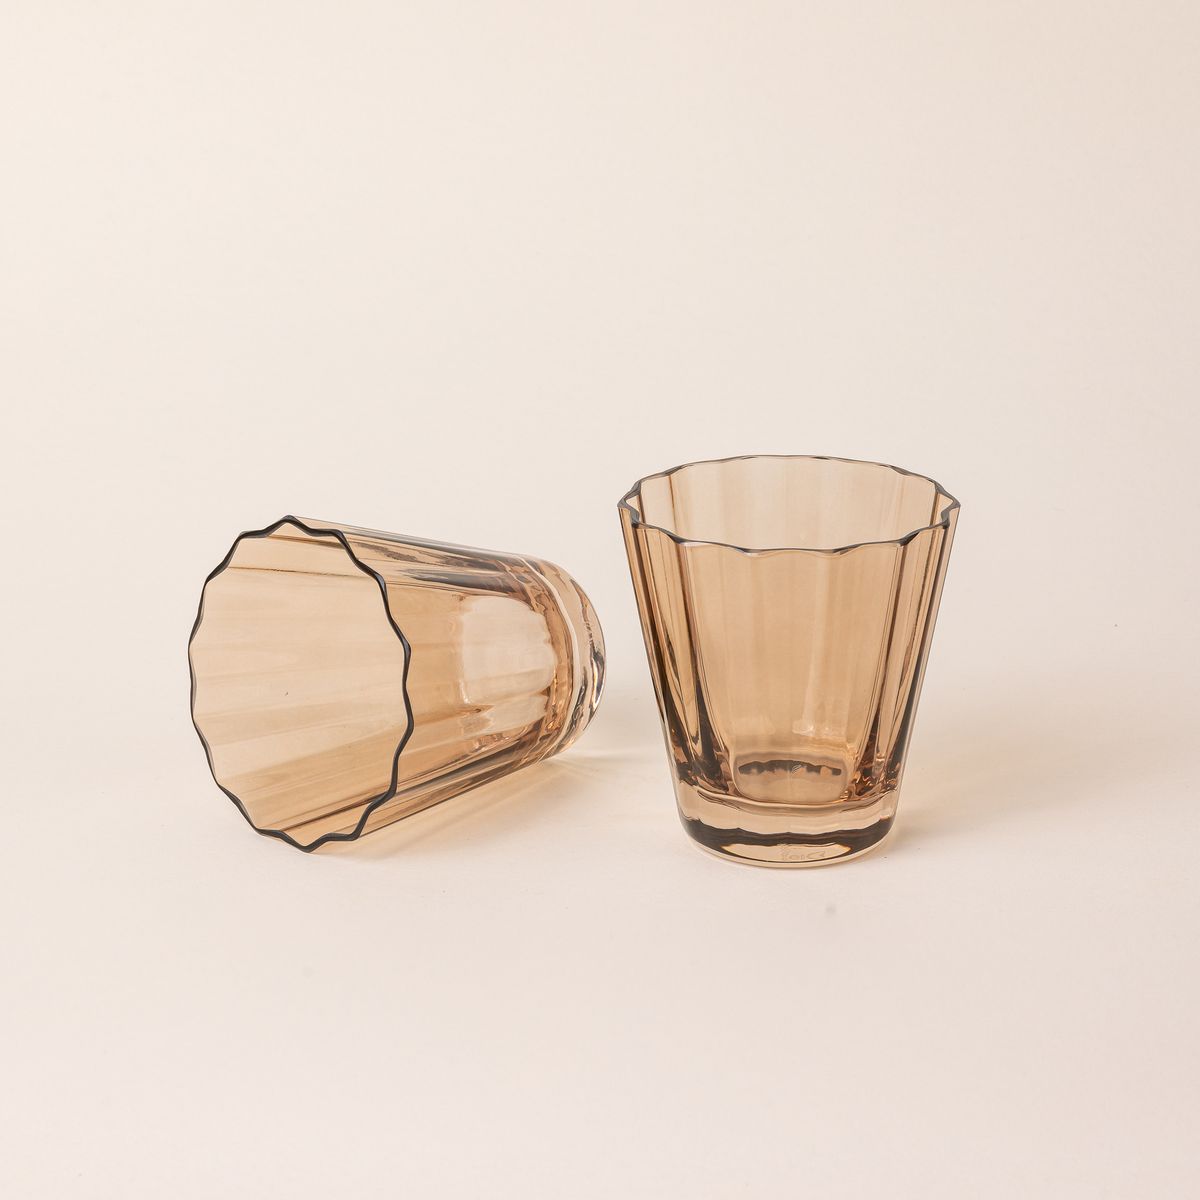 Two transparent light amber glasses with wide grooves on the site. One sits up right, and one is on its side.